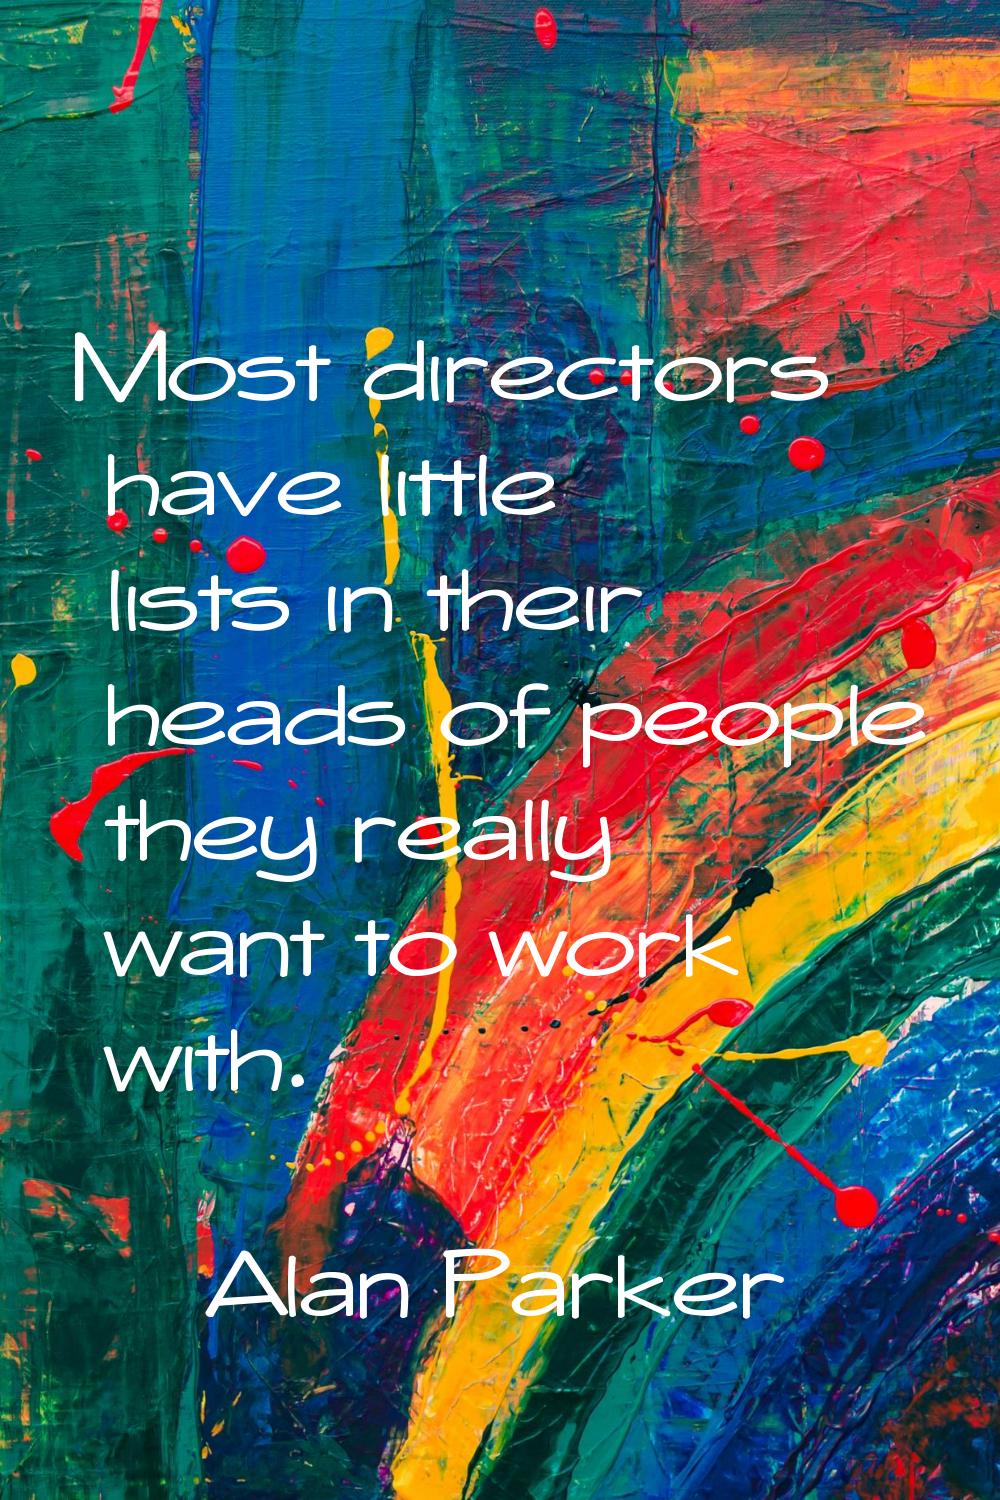 Most directors have little lists in their heads of people they really want to work with.